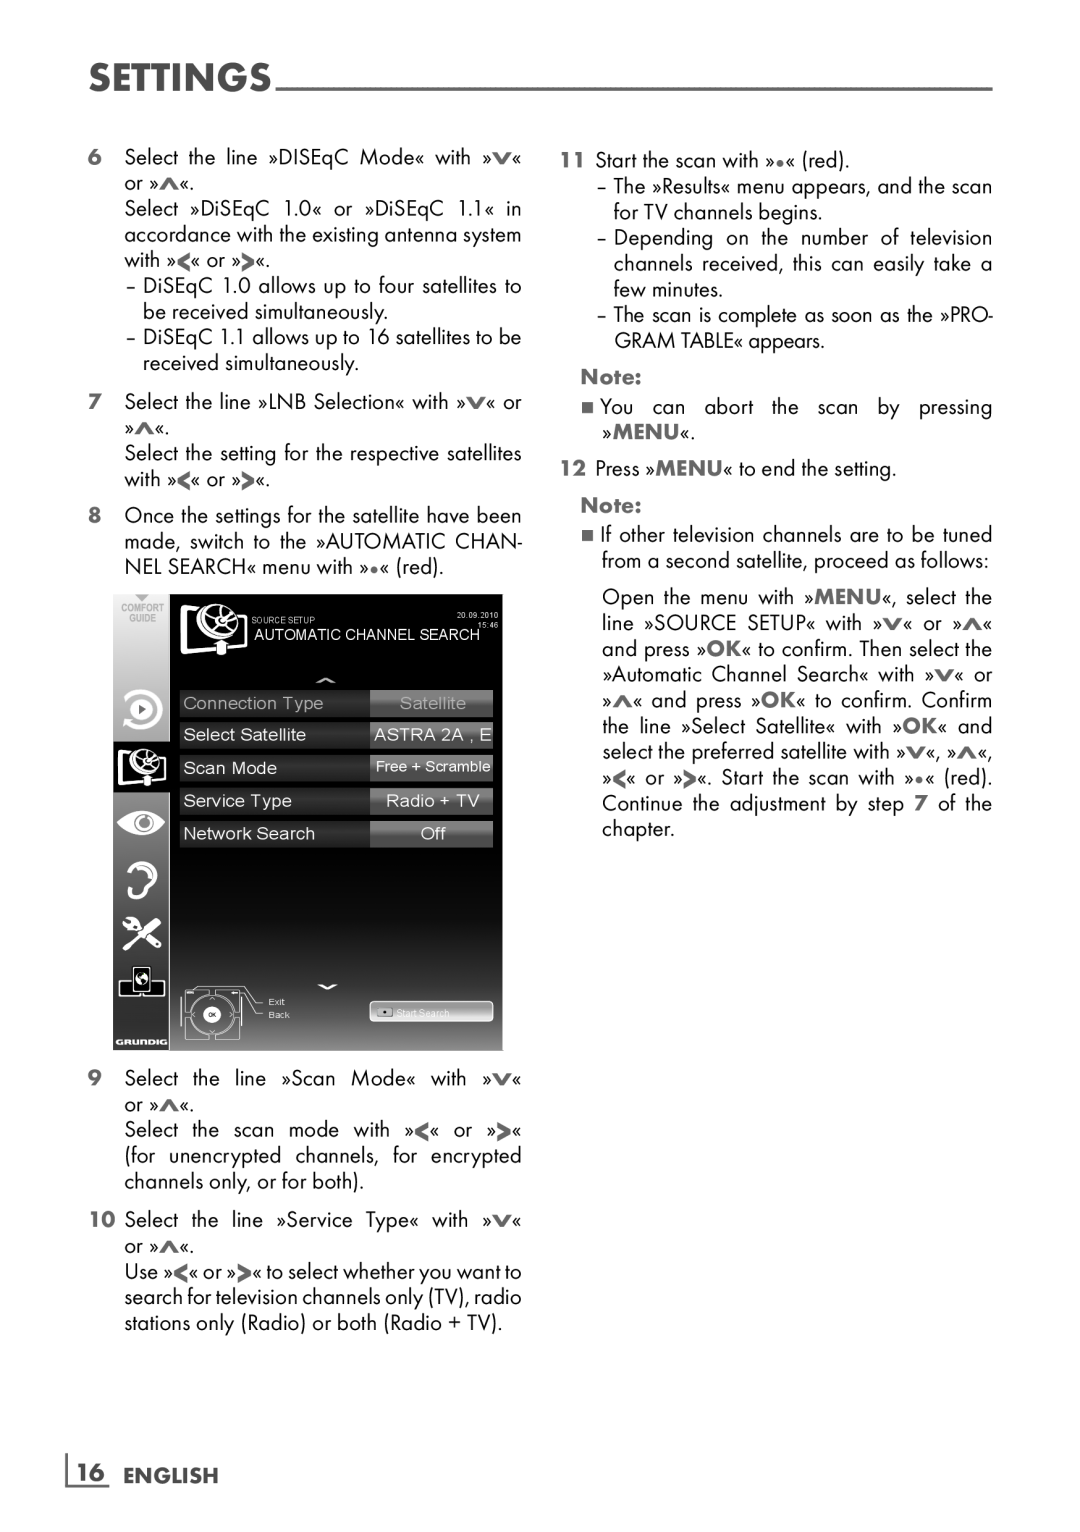 Grundig 40 VLE 8130 BG manual ­16 ENGLISH, DiSEqC 1.0 allows up to four satellites to be received simultaneously 